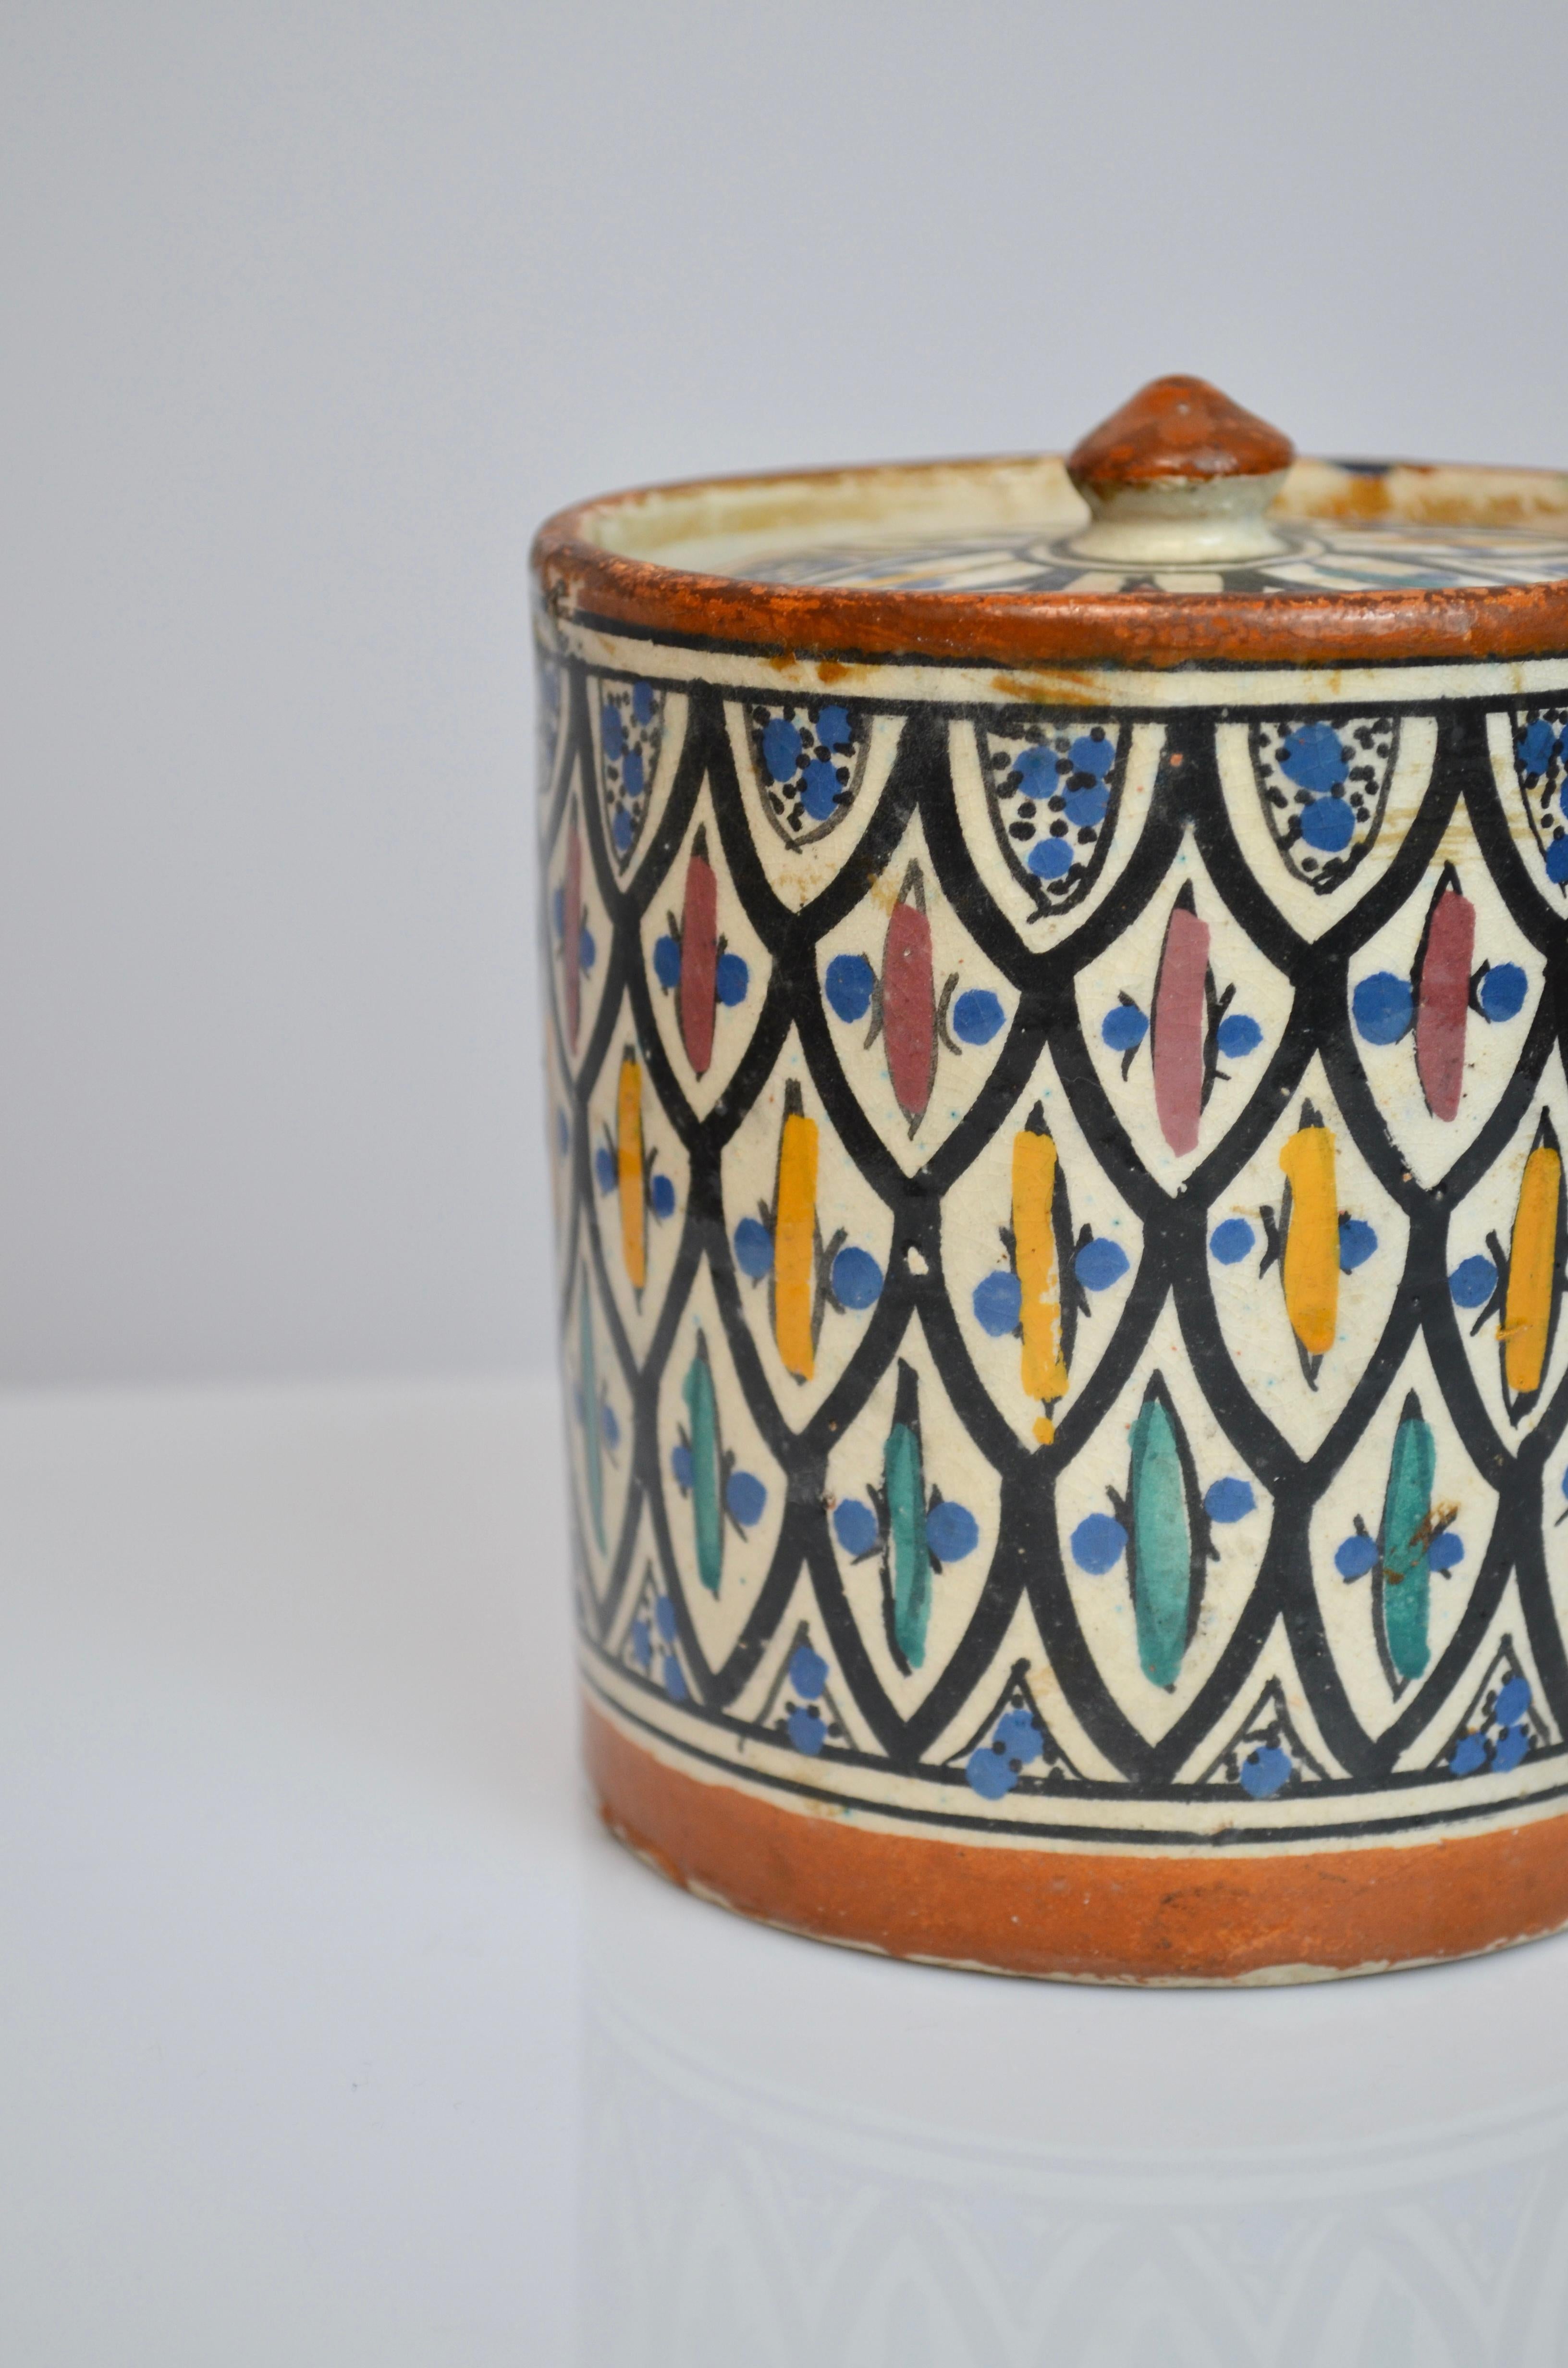 Ceramic pot with lid, Morocco - Safi, 30’s/40’s
Signed on the bottom